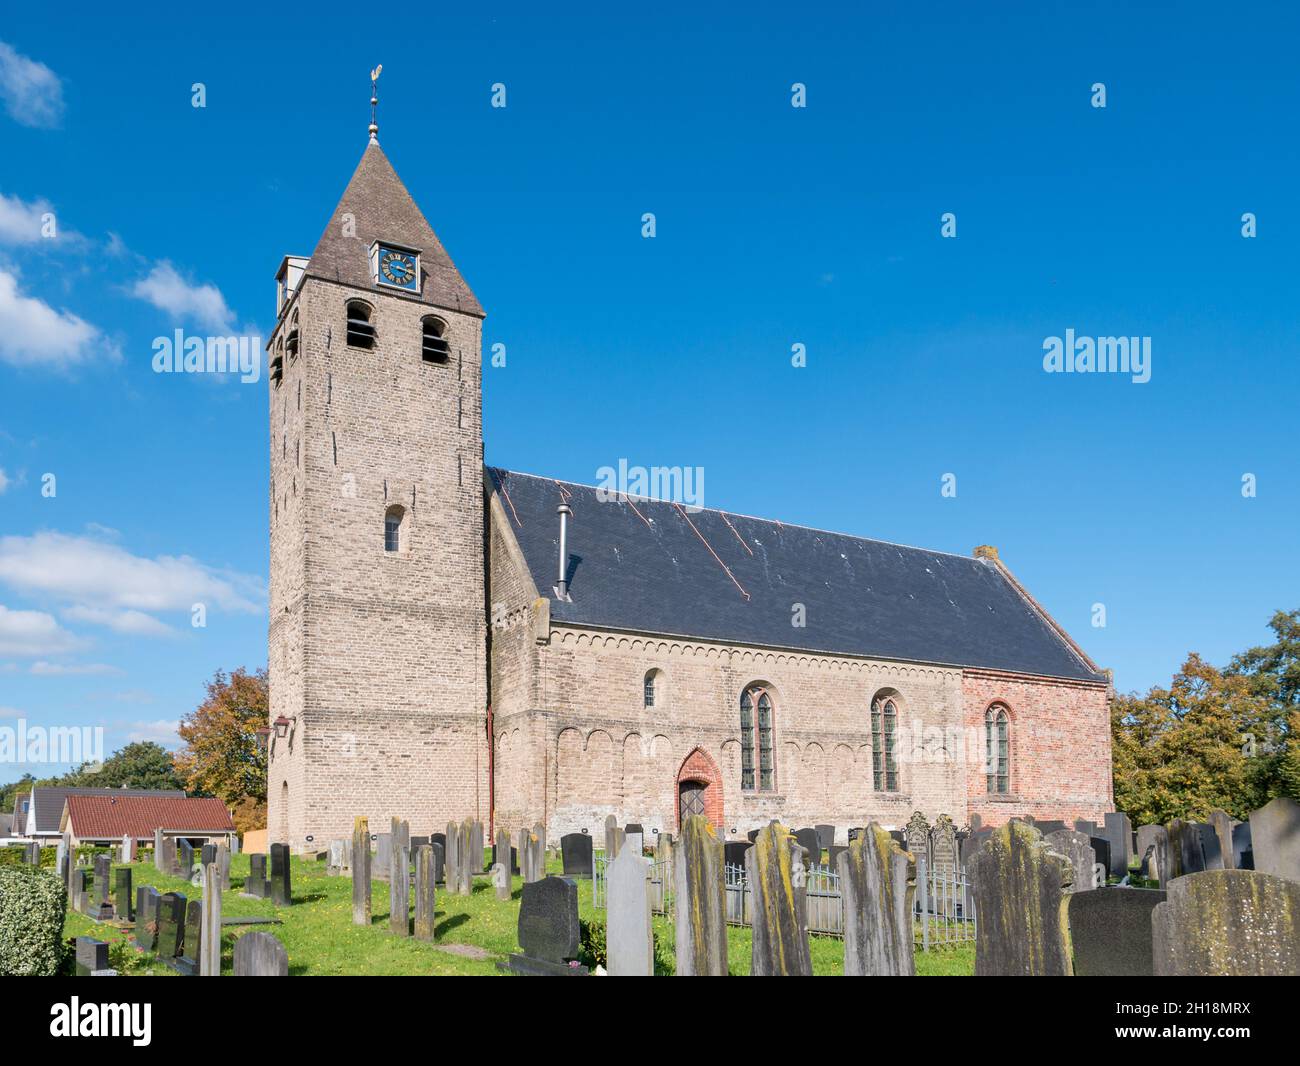 Saint Agathachurch and churchyard in village of Oudega, Alde Feanen, Friesland, Netherlands Stock Photo